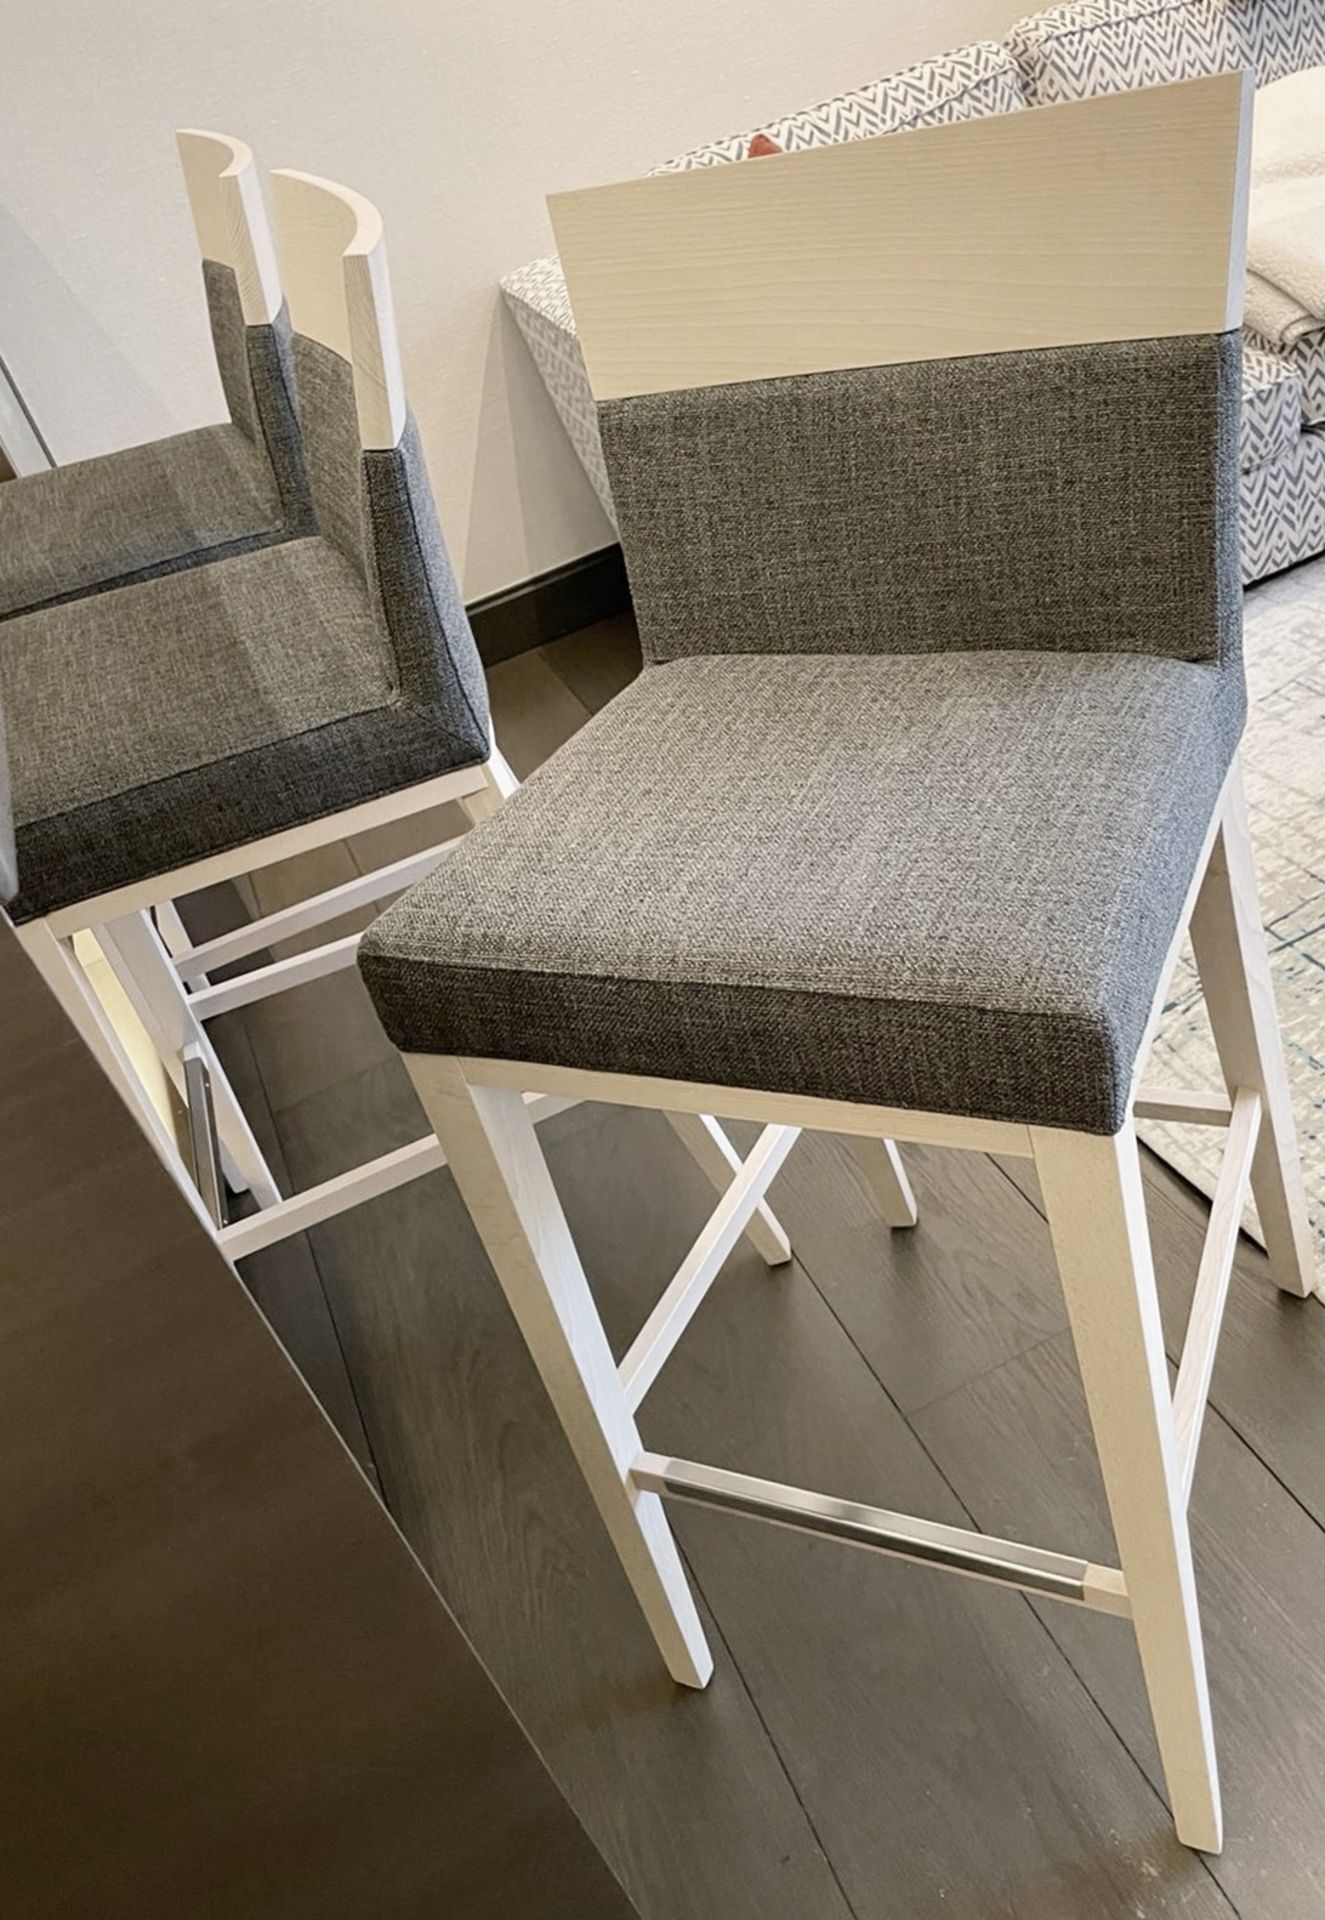 3 x MONTBEL Designer Bar Stools With Light Stained Frames And Grey Fabric Upholstery - Image 9 of 18